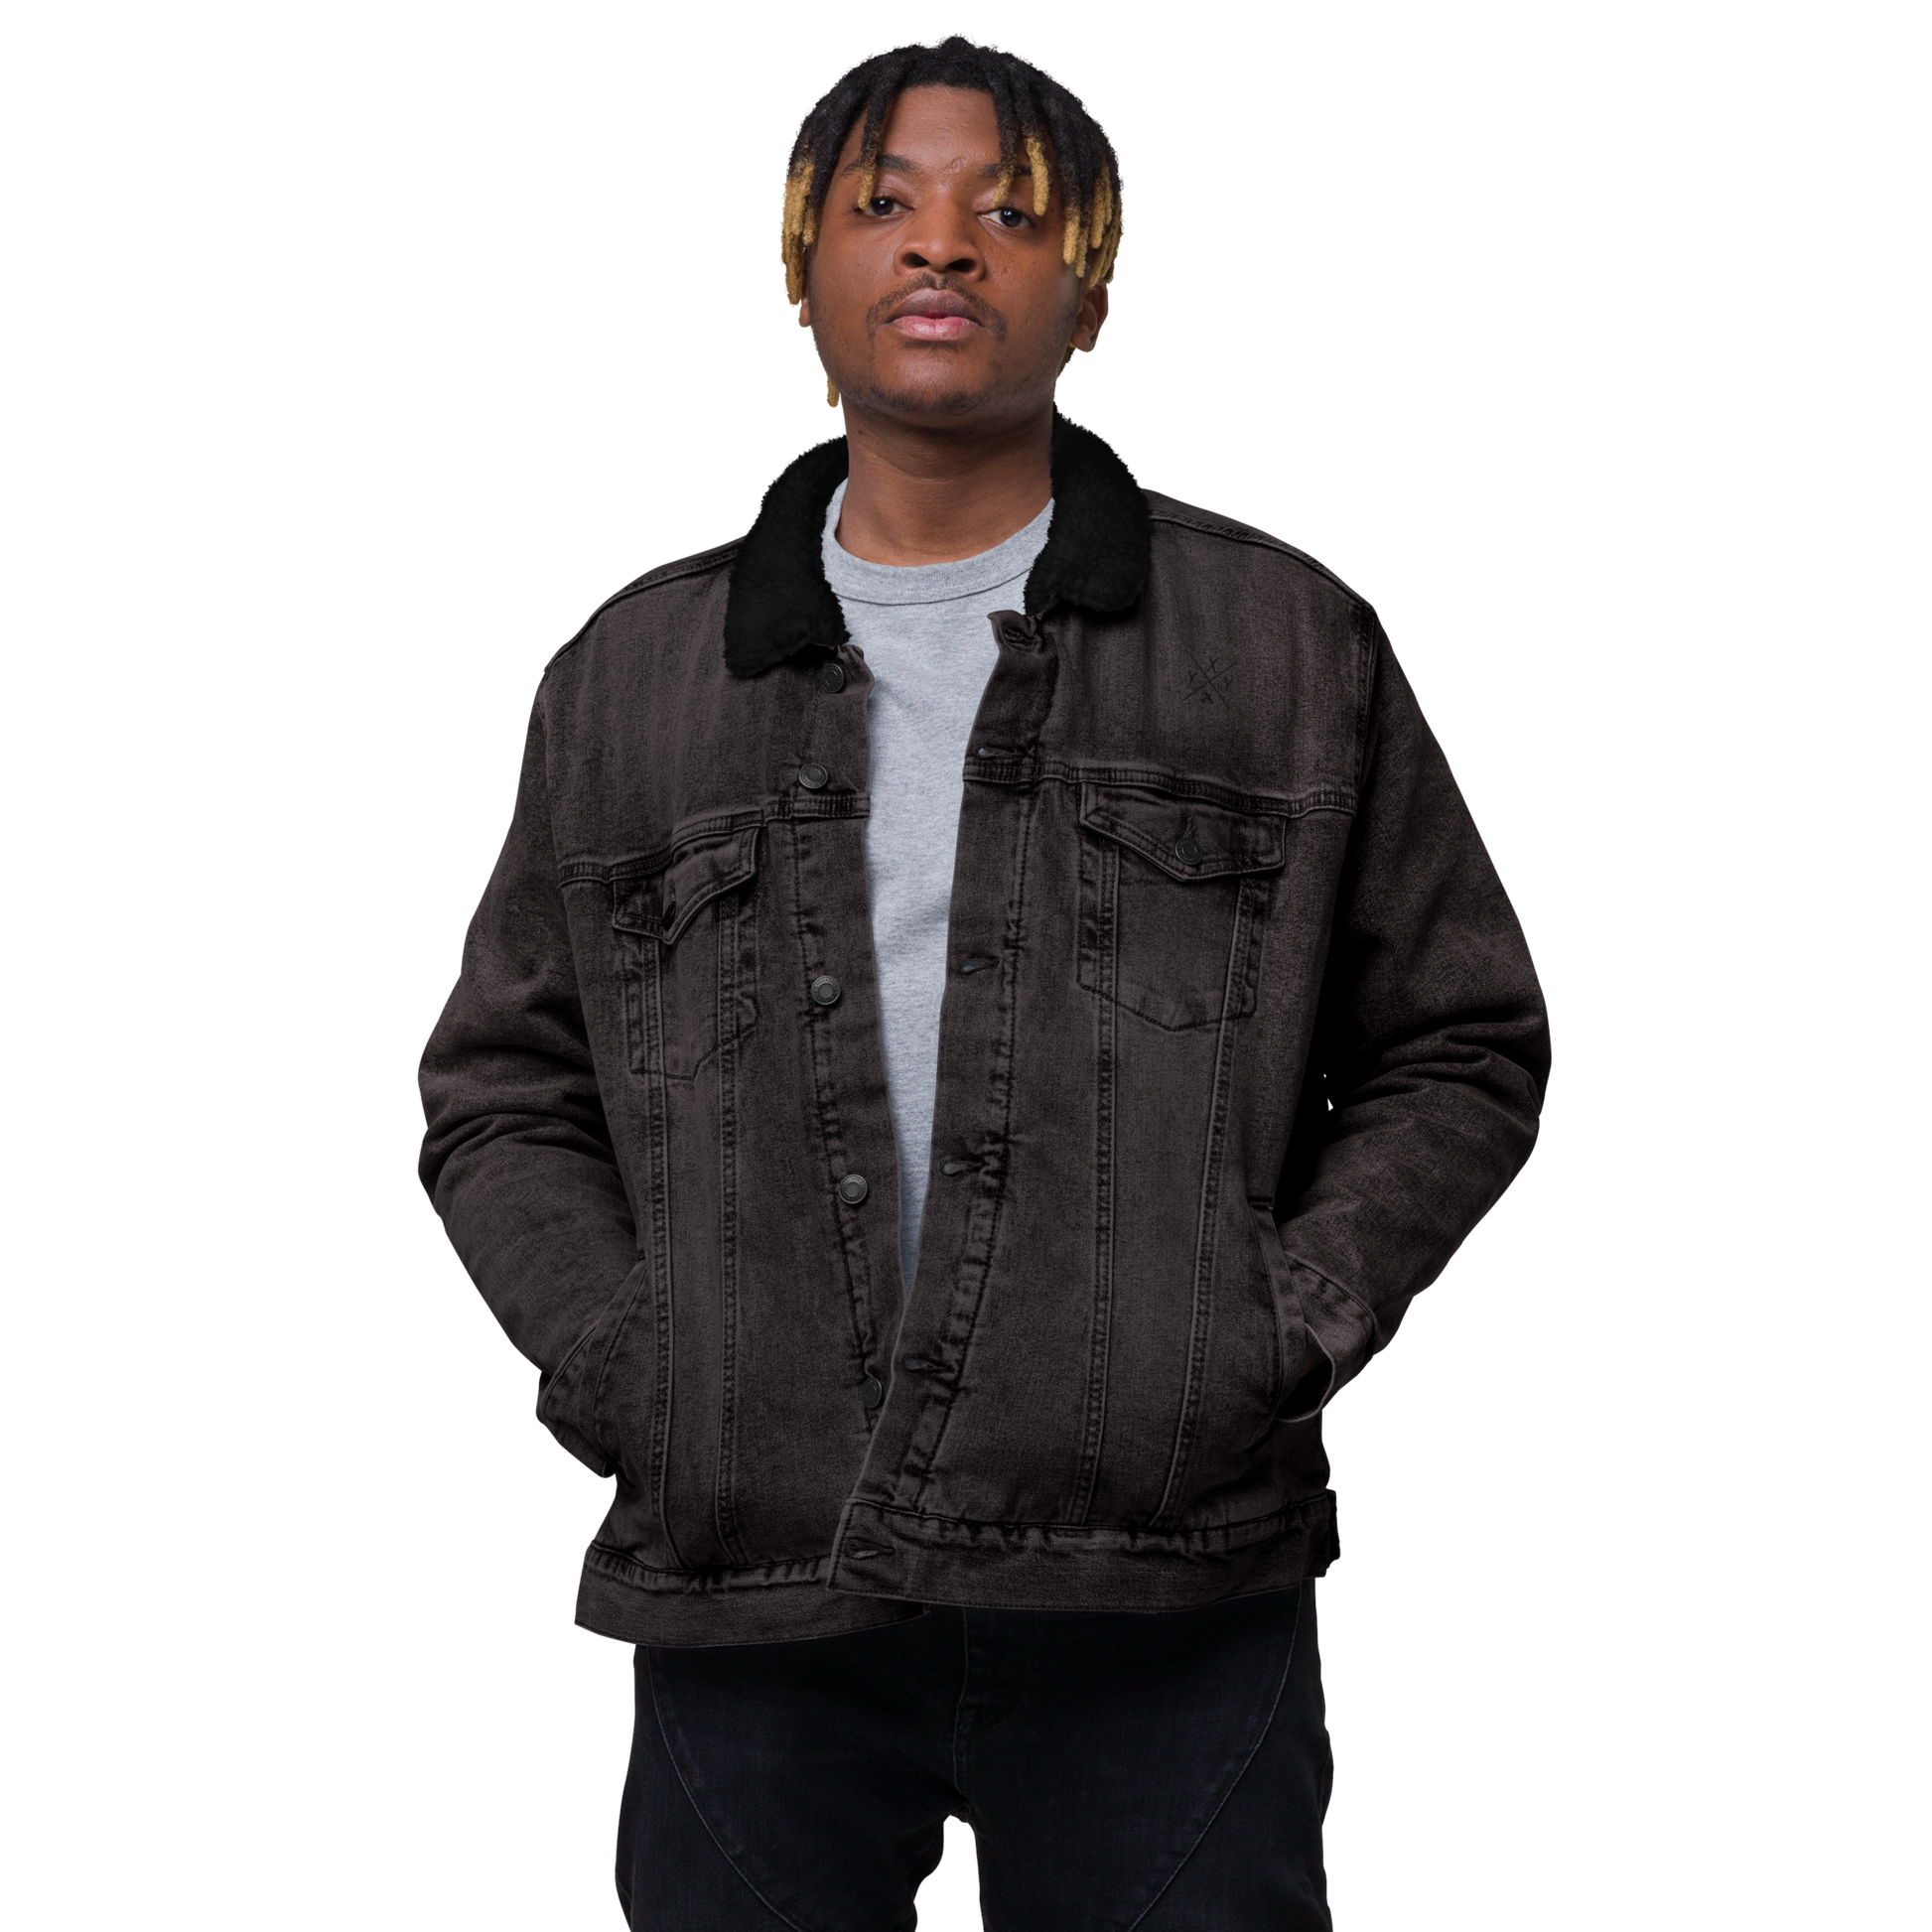 YHM Designs - YXY Whitehorse Denim Sherpa Jacket - Crossed-X Design with Airport Code and Vintage Propliner - Black & White Embroidery - Image 01